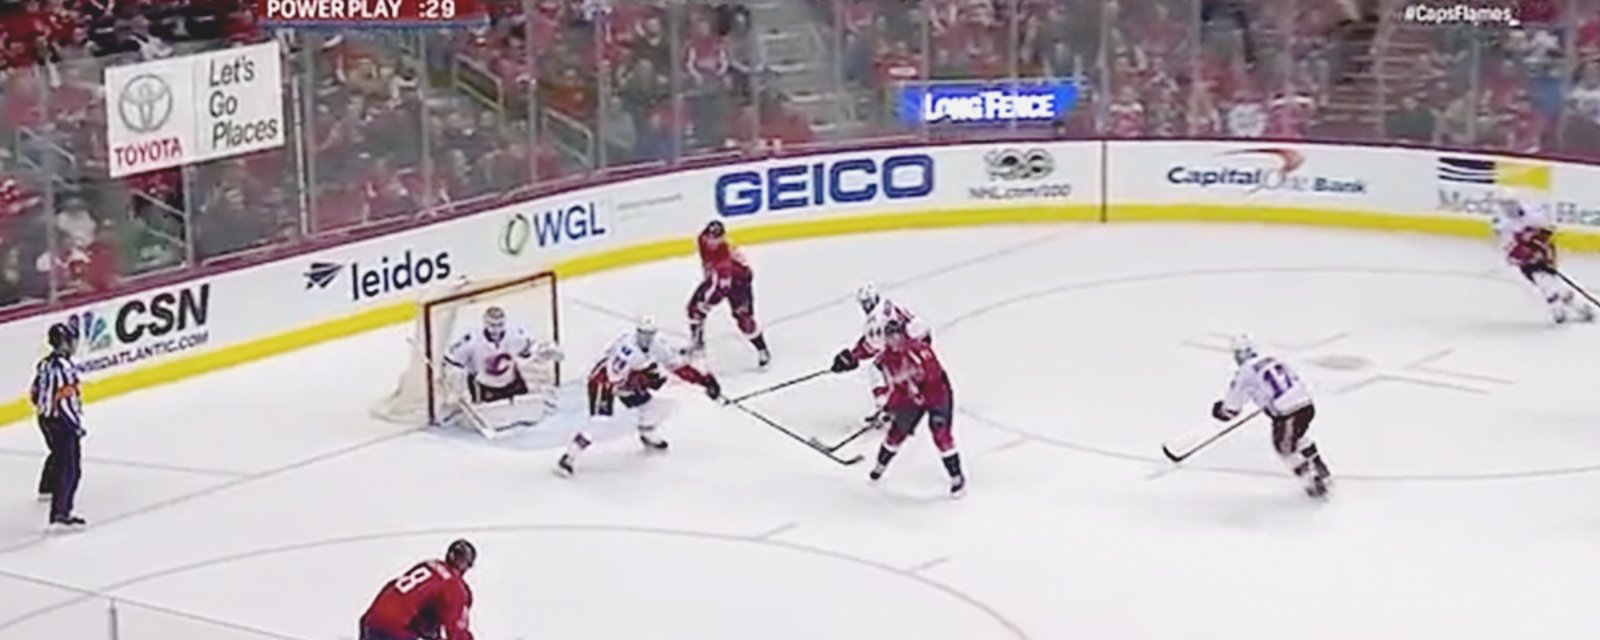 Must see: Ovechkin roofs wrister for PPG